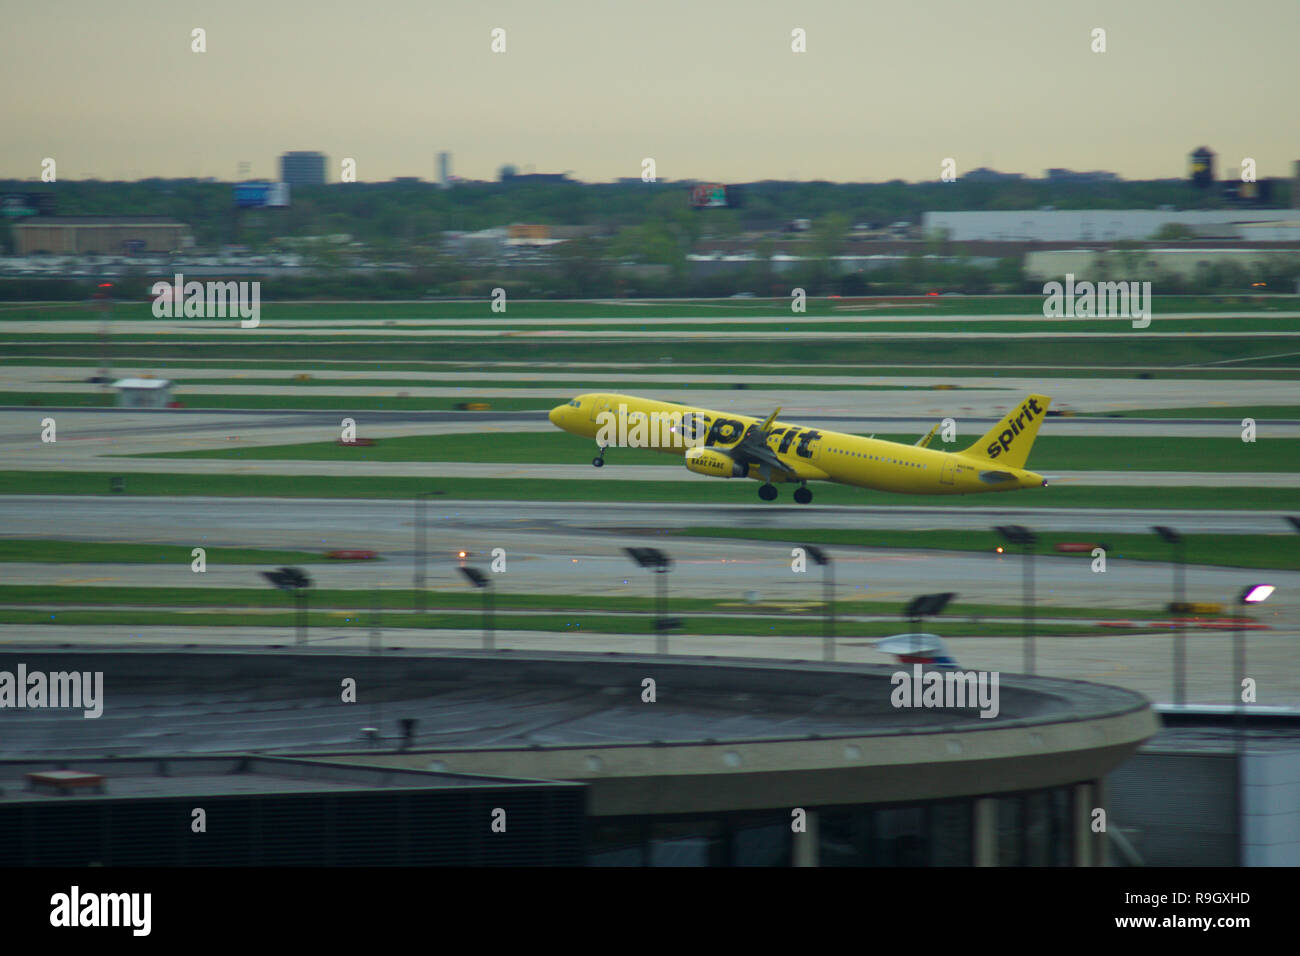 CHICAGO, ILLINOIS, UNITED STATES - MAY 11th, 2018:A Spirit Airlines Airbus A320 at O'Hare International Airport at takeoff. Stock Photo